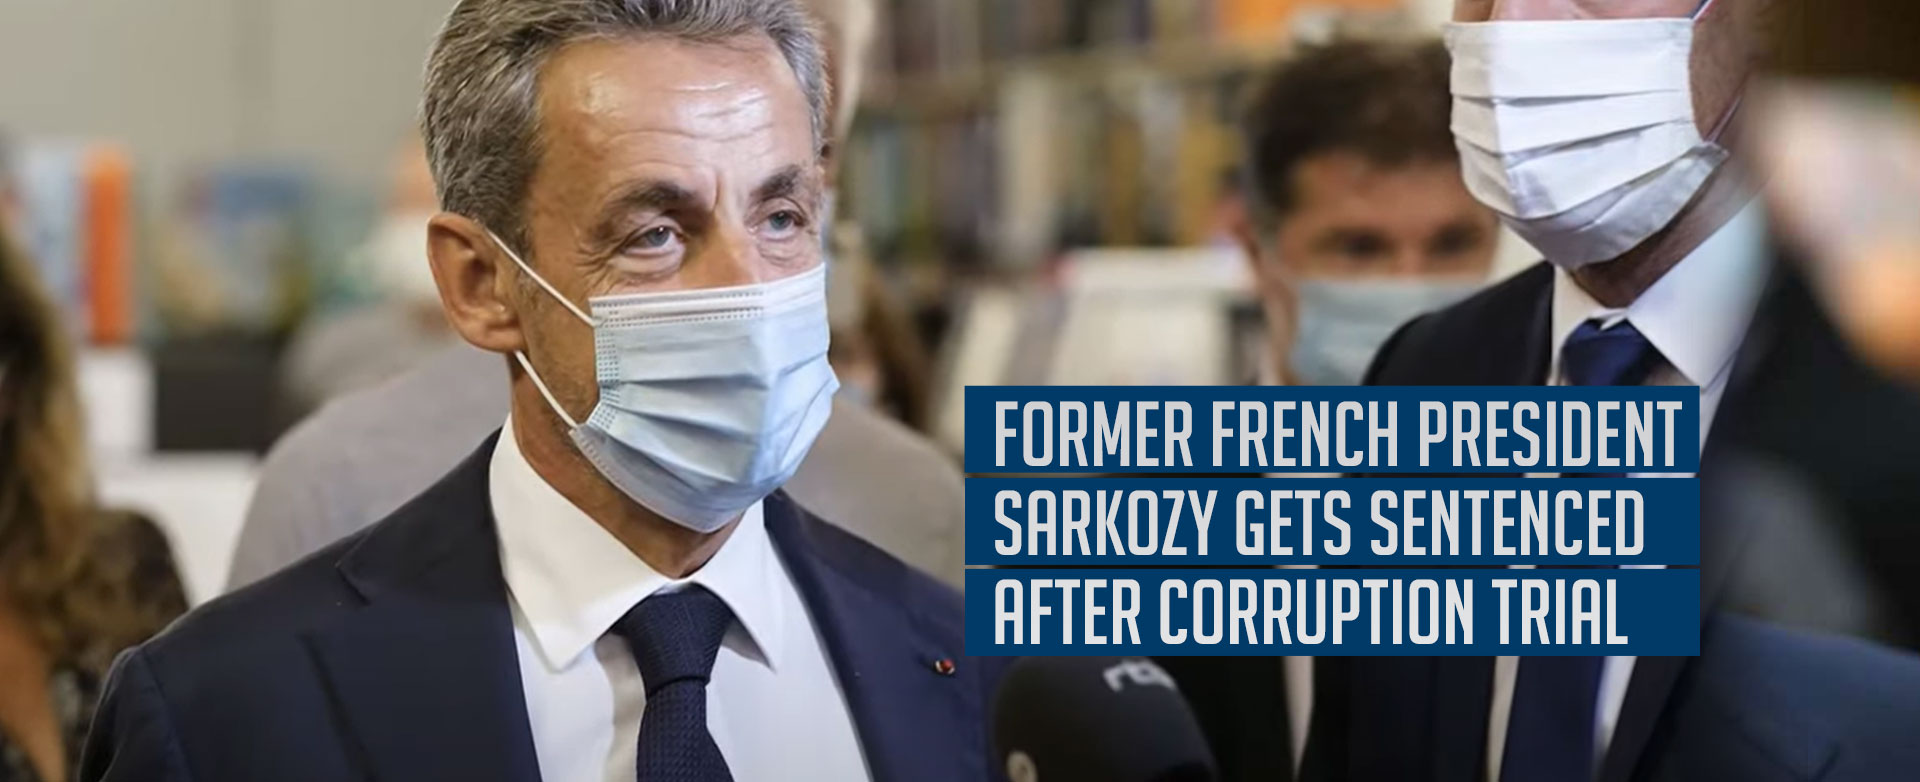 MyPatriotsNetwork-Former French President Sarkozy Gets Sentenced After Corruption Trial